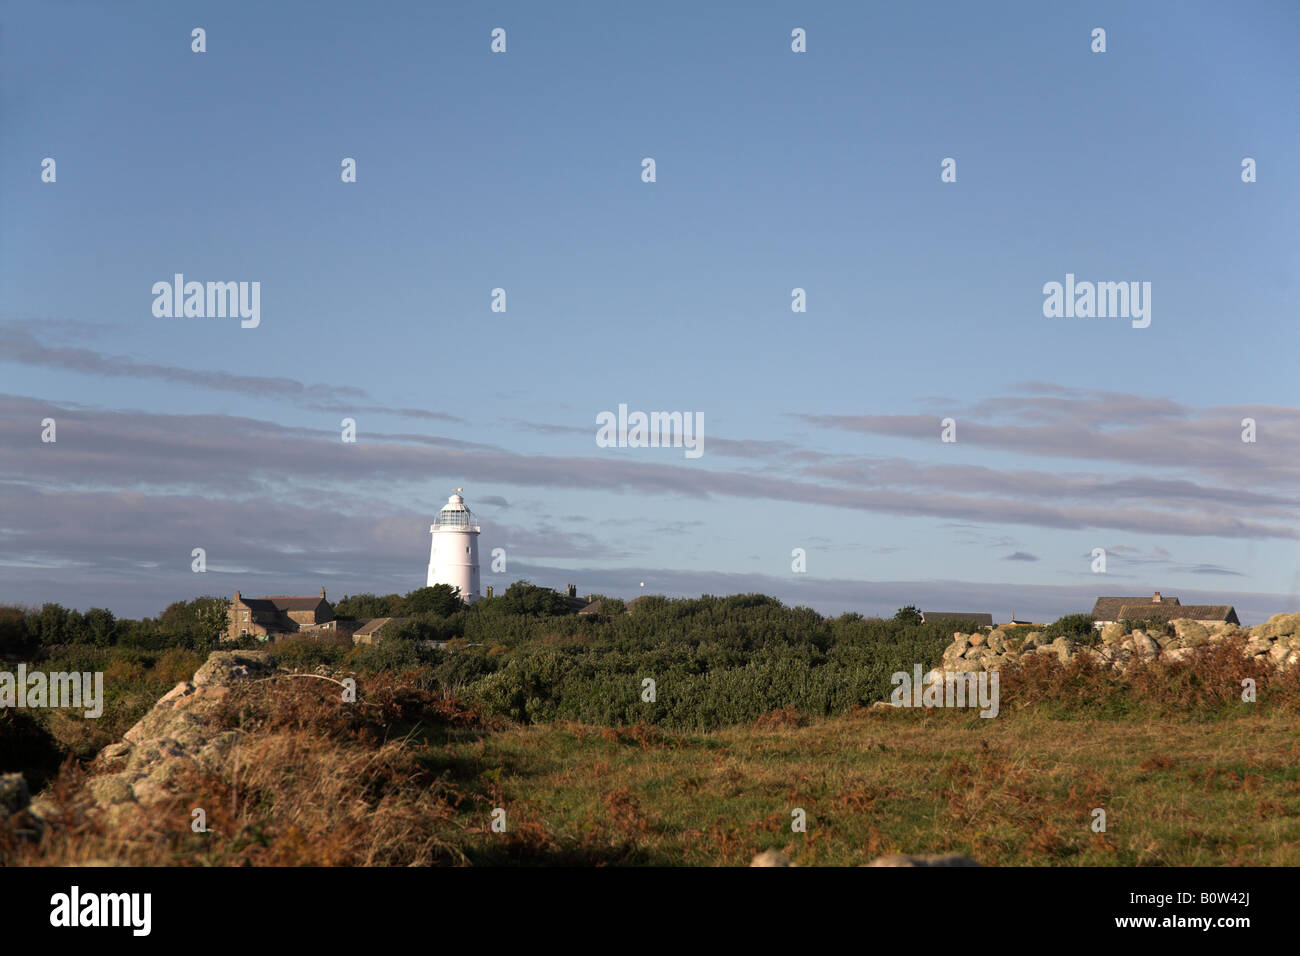 The Lighthouse St Agnes Isles of Scilly Stock Photo